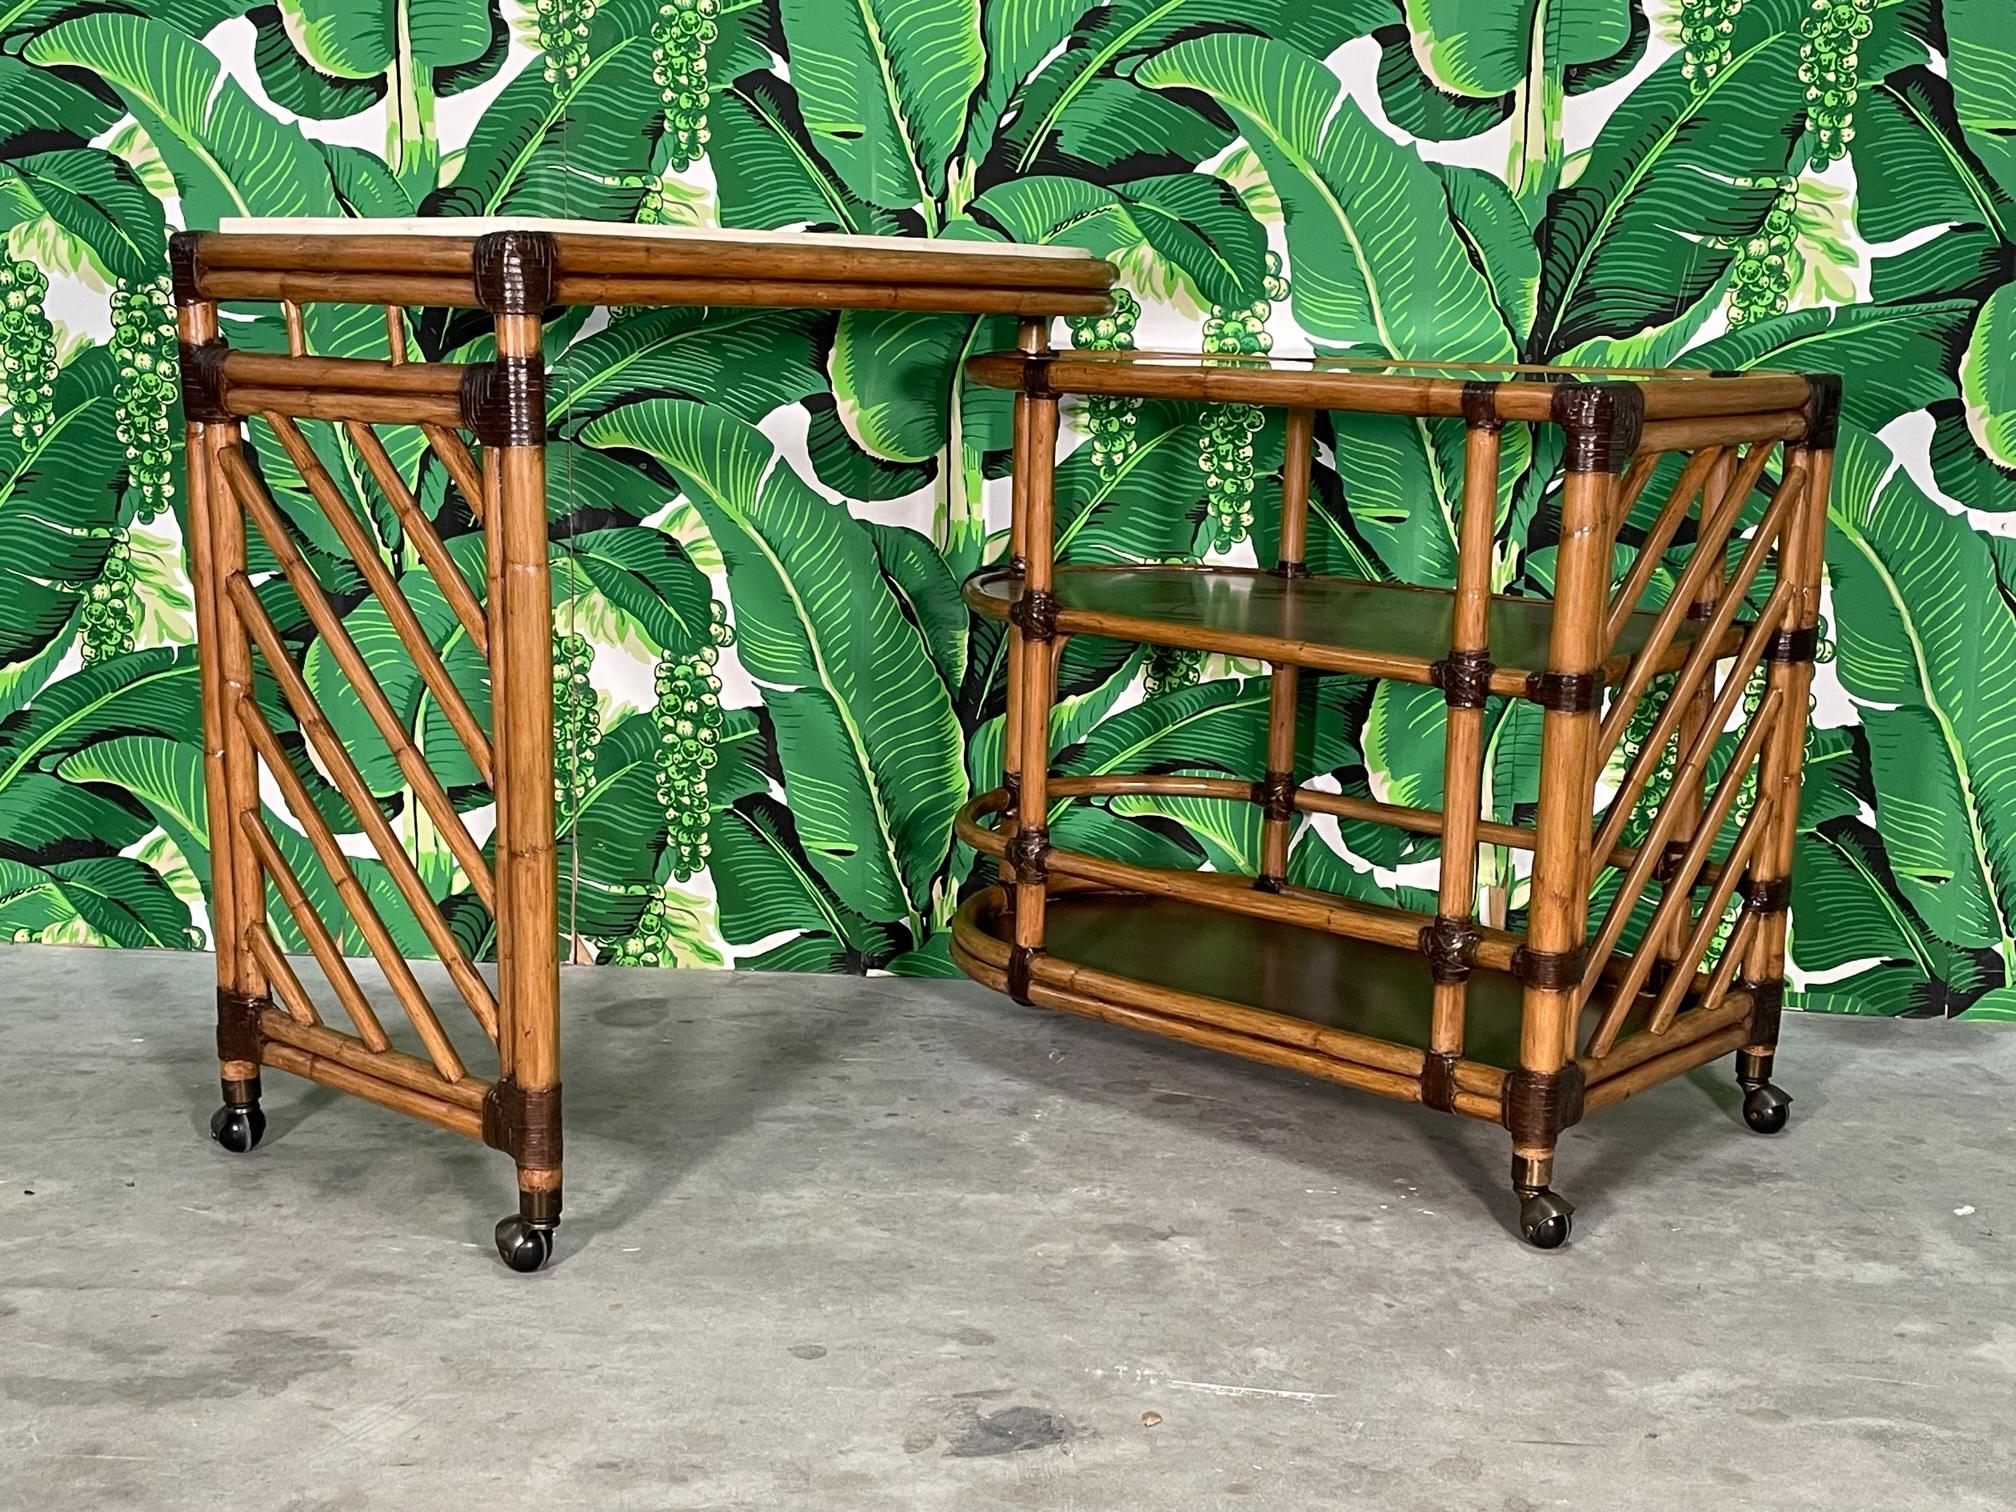 Rattan bar cart by Lexington Furniture features folding design and antique brass casters. Beveled glass top on lower section, upper section has a sealed Cordova stone surface. Good condition with minor imperfections consistent with age, see photos